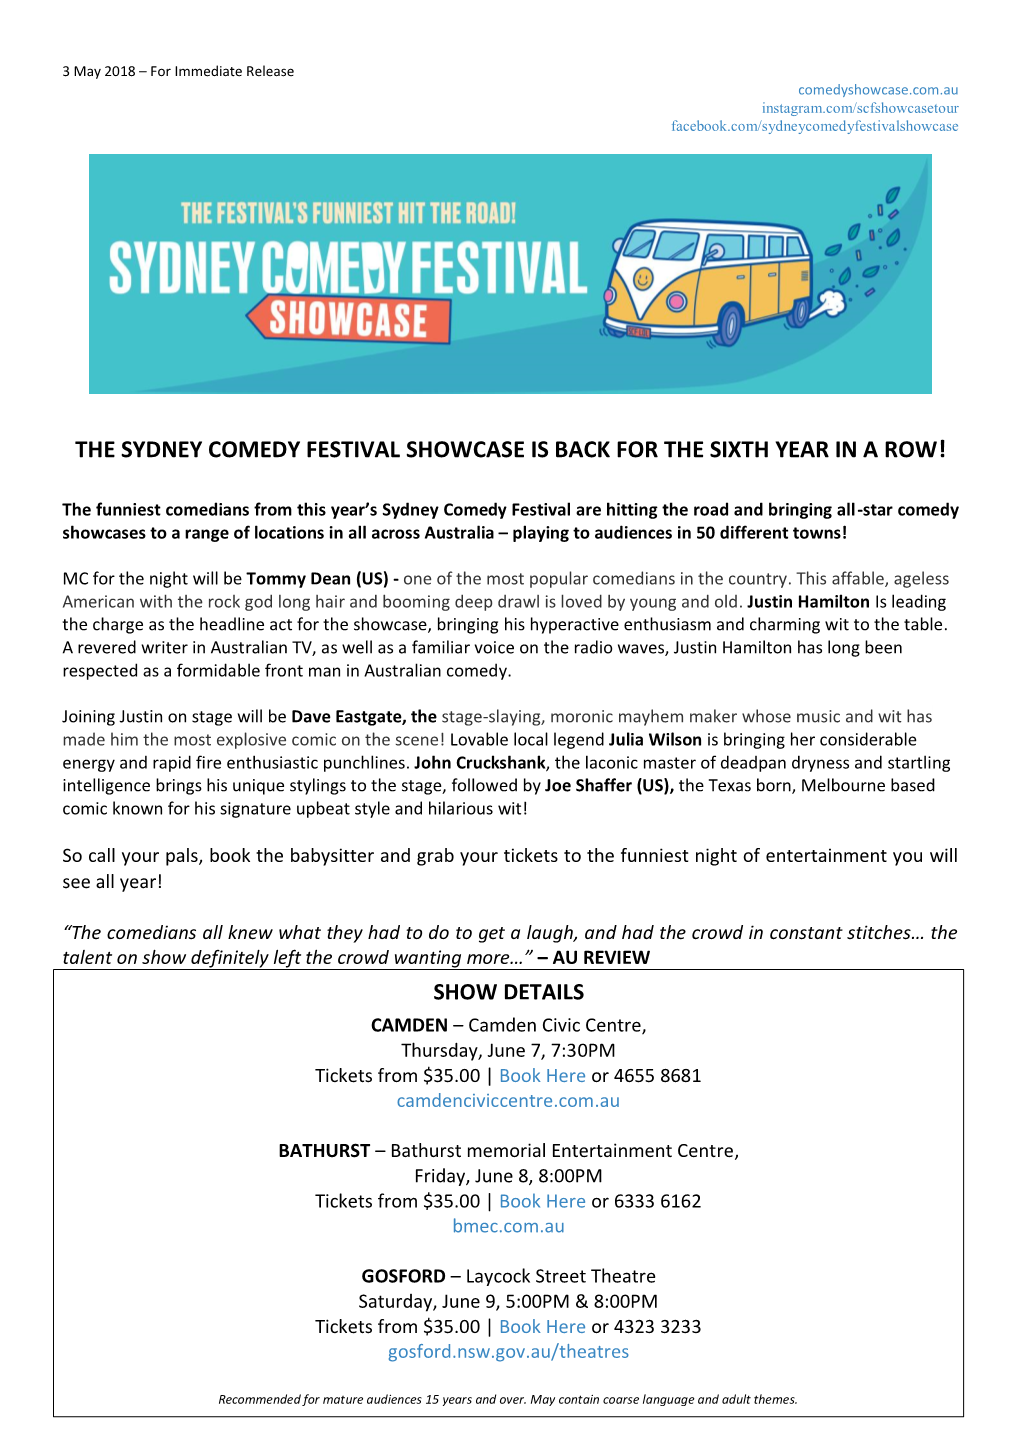 The Sydney Comedy Festival Showcase Is Back for the Sixth Year in a Row!